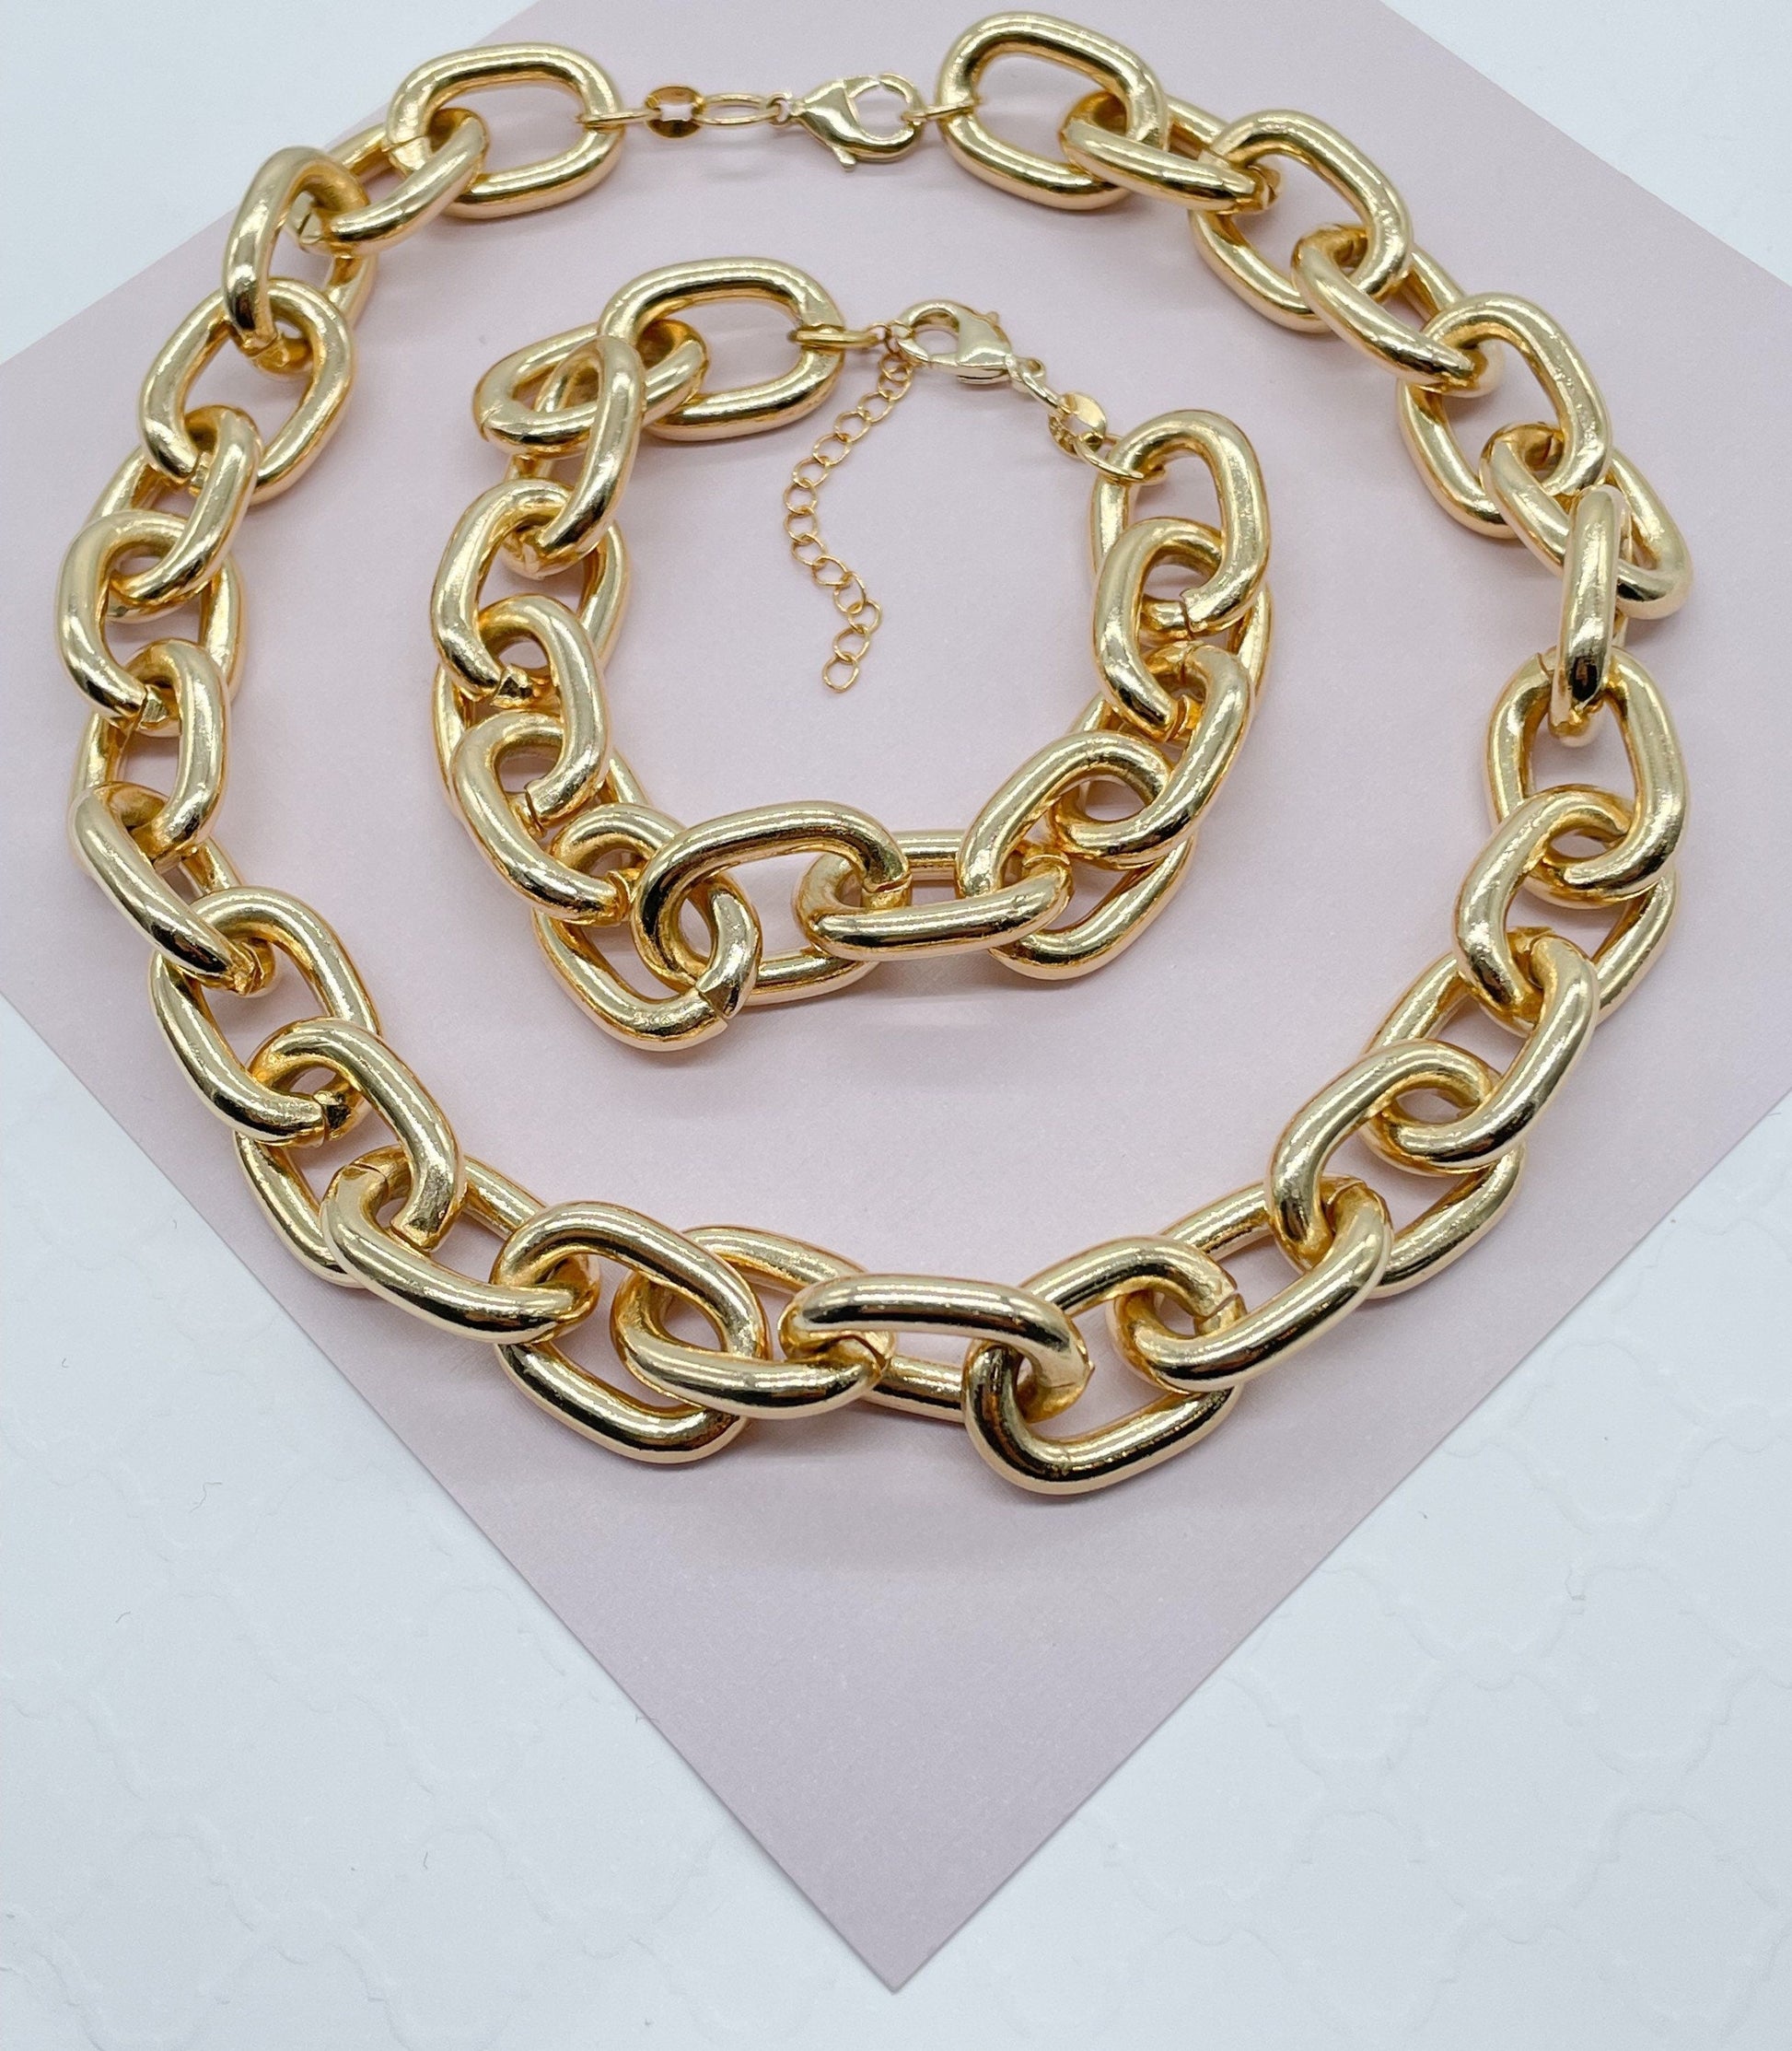 18k Gold Filled Thick Round Cable Link Choker Link Chain Necklace Chunky Choker Necklace 18k Gold Filled